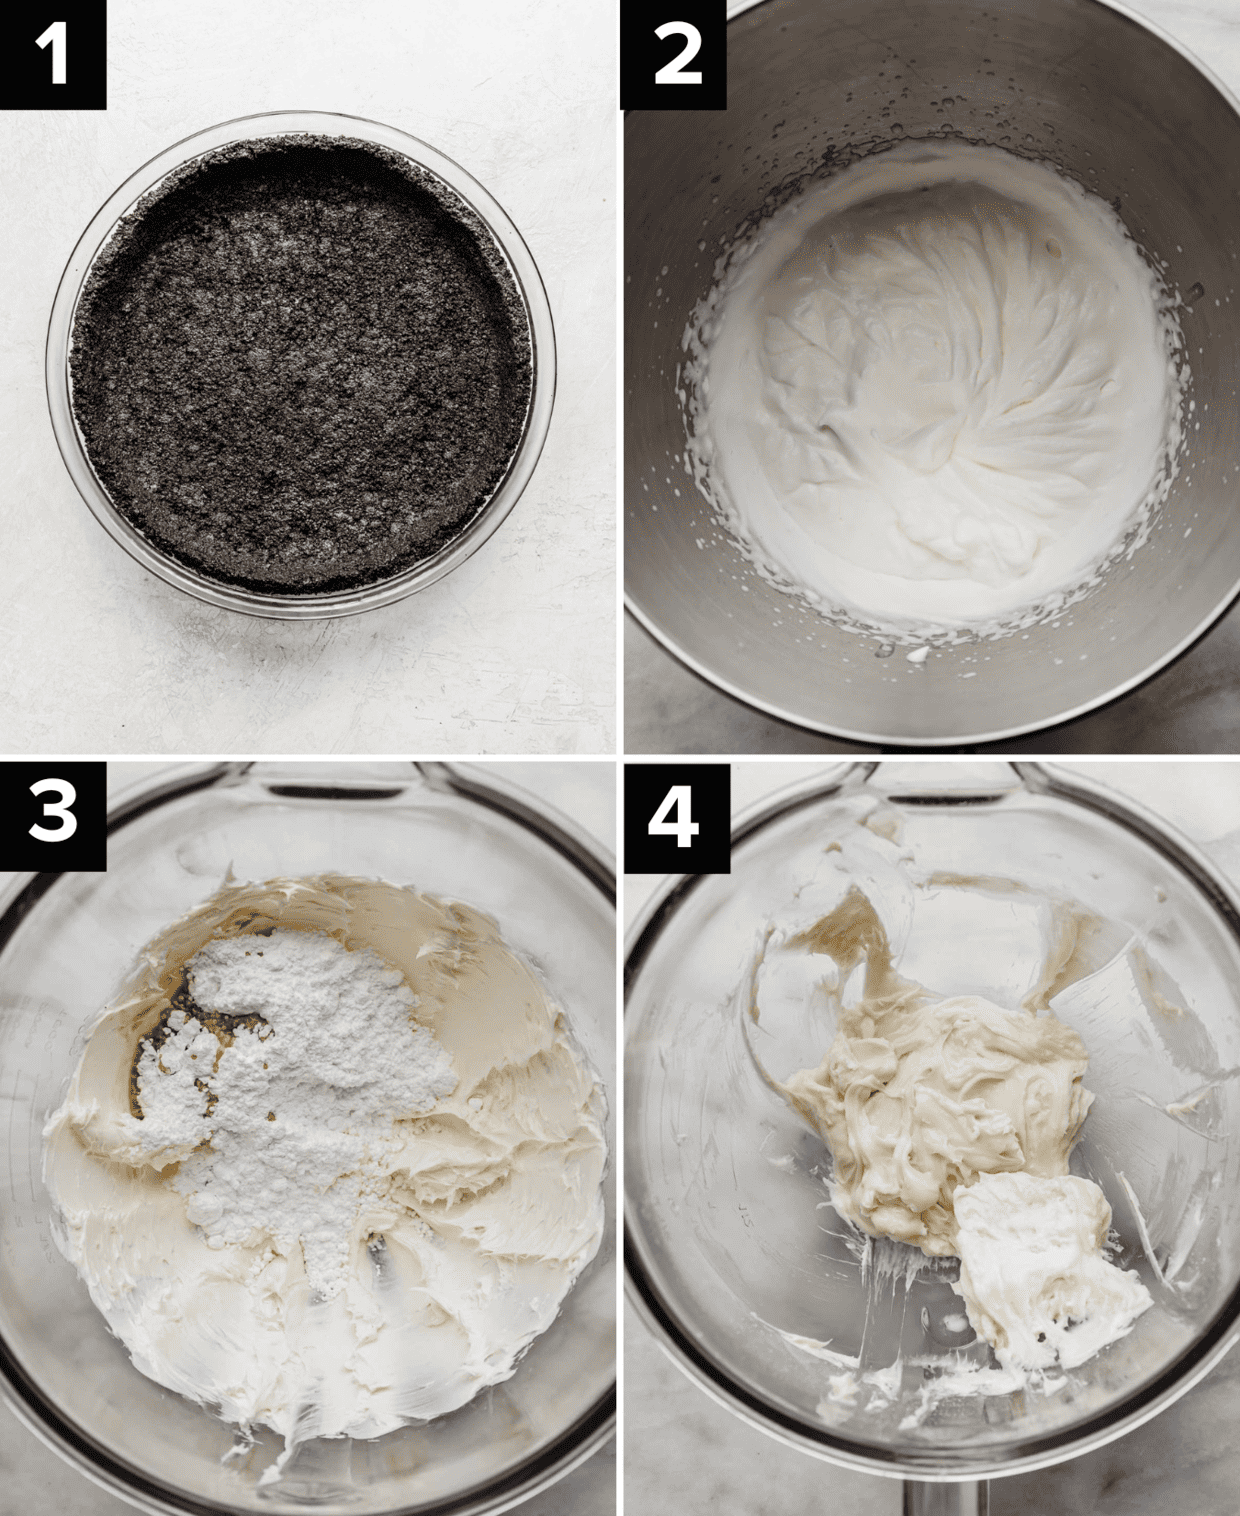 Four pictures showing the process of how to make Oreo pie (Cookies and Cream Pie), top left photo is Oreo pie crust on a white background, top right is whipped cream in a metal bowl, bottom left and right photo is cream cheese mixture in a glass bowl.